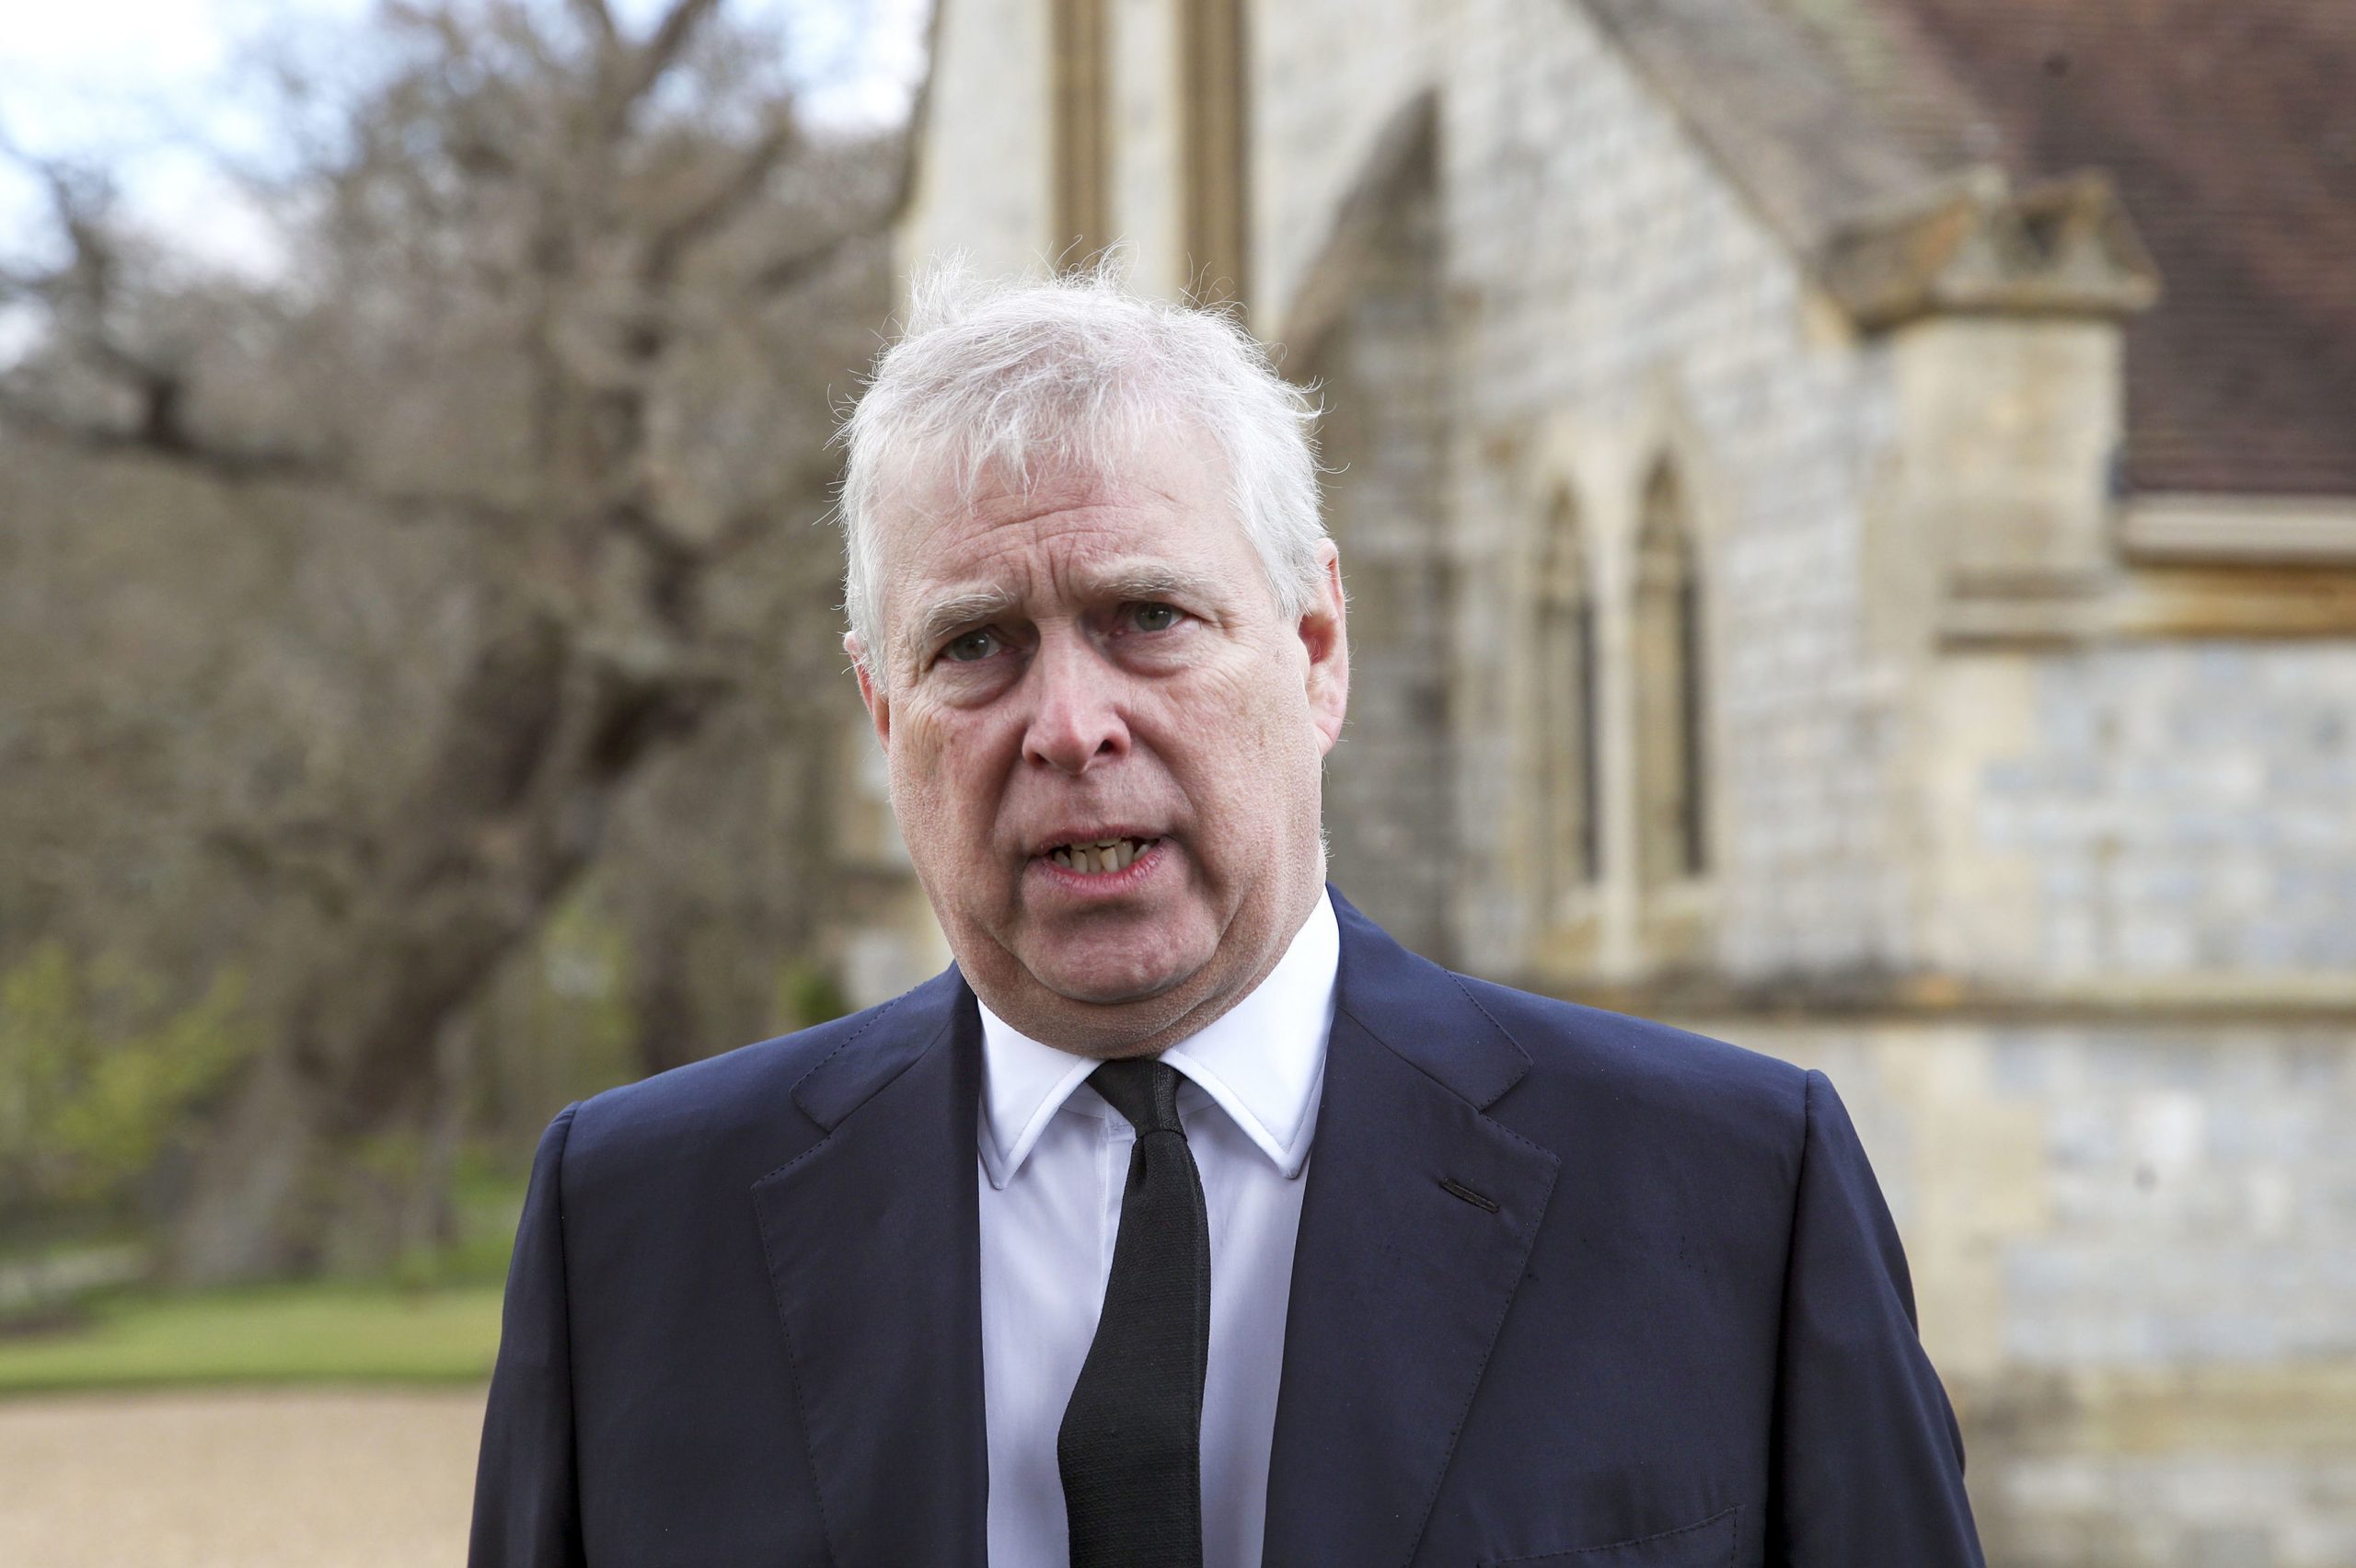 What are the allegations against Prince Andrew?